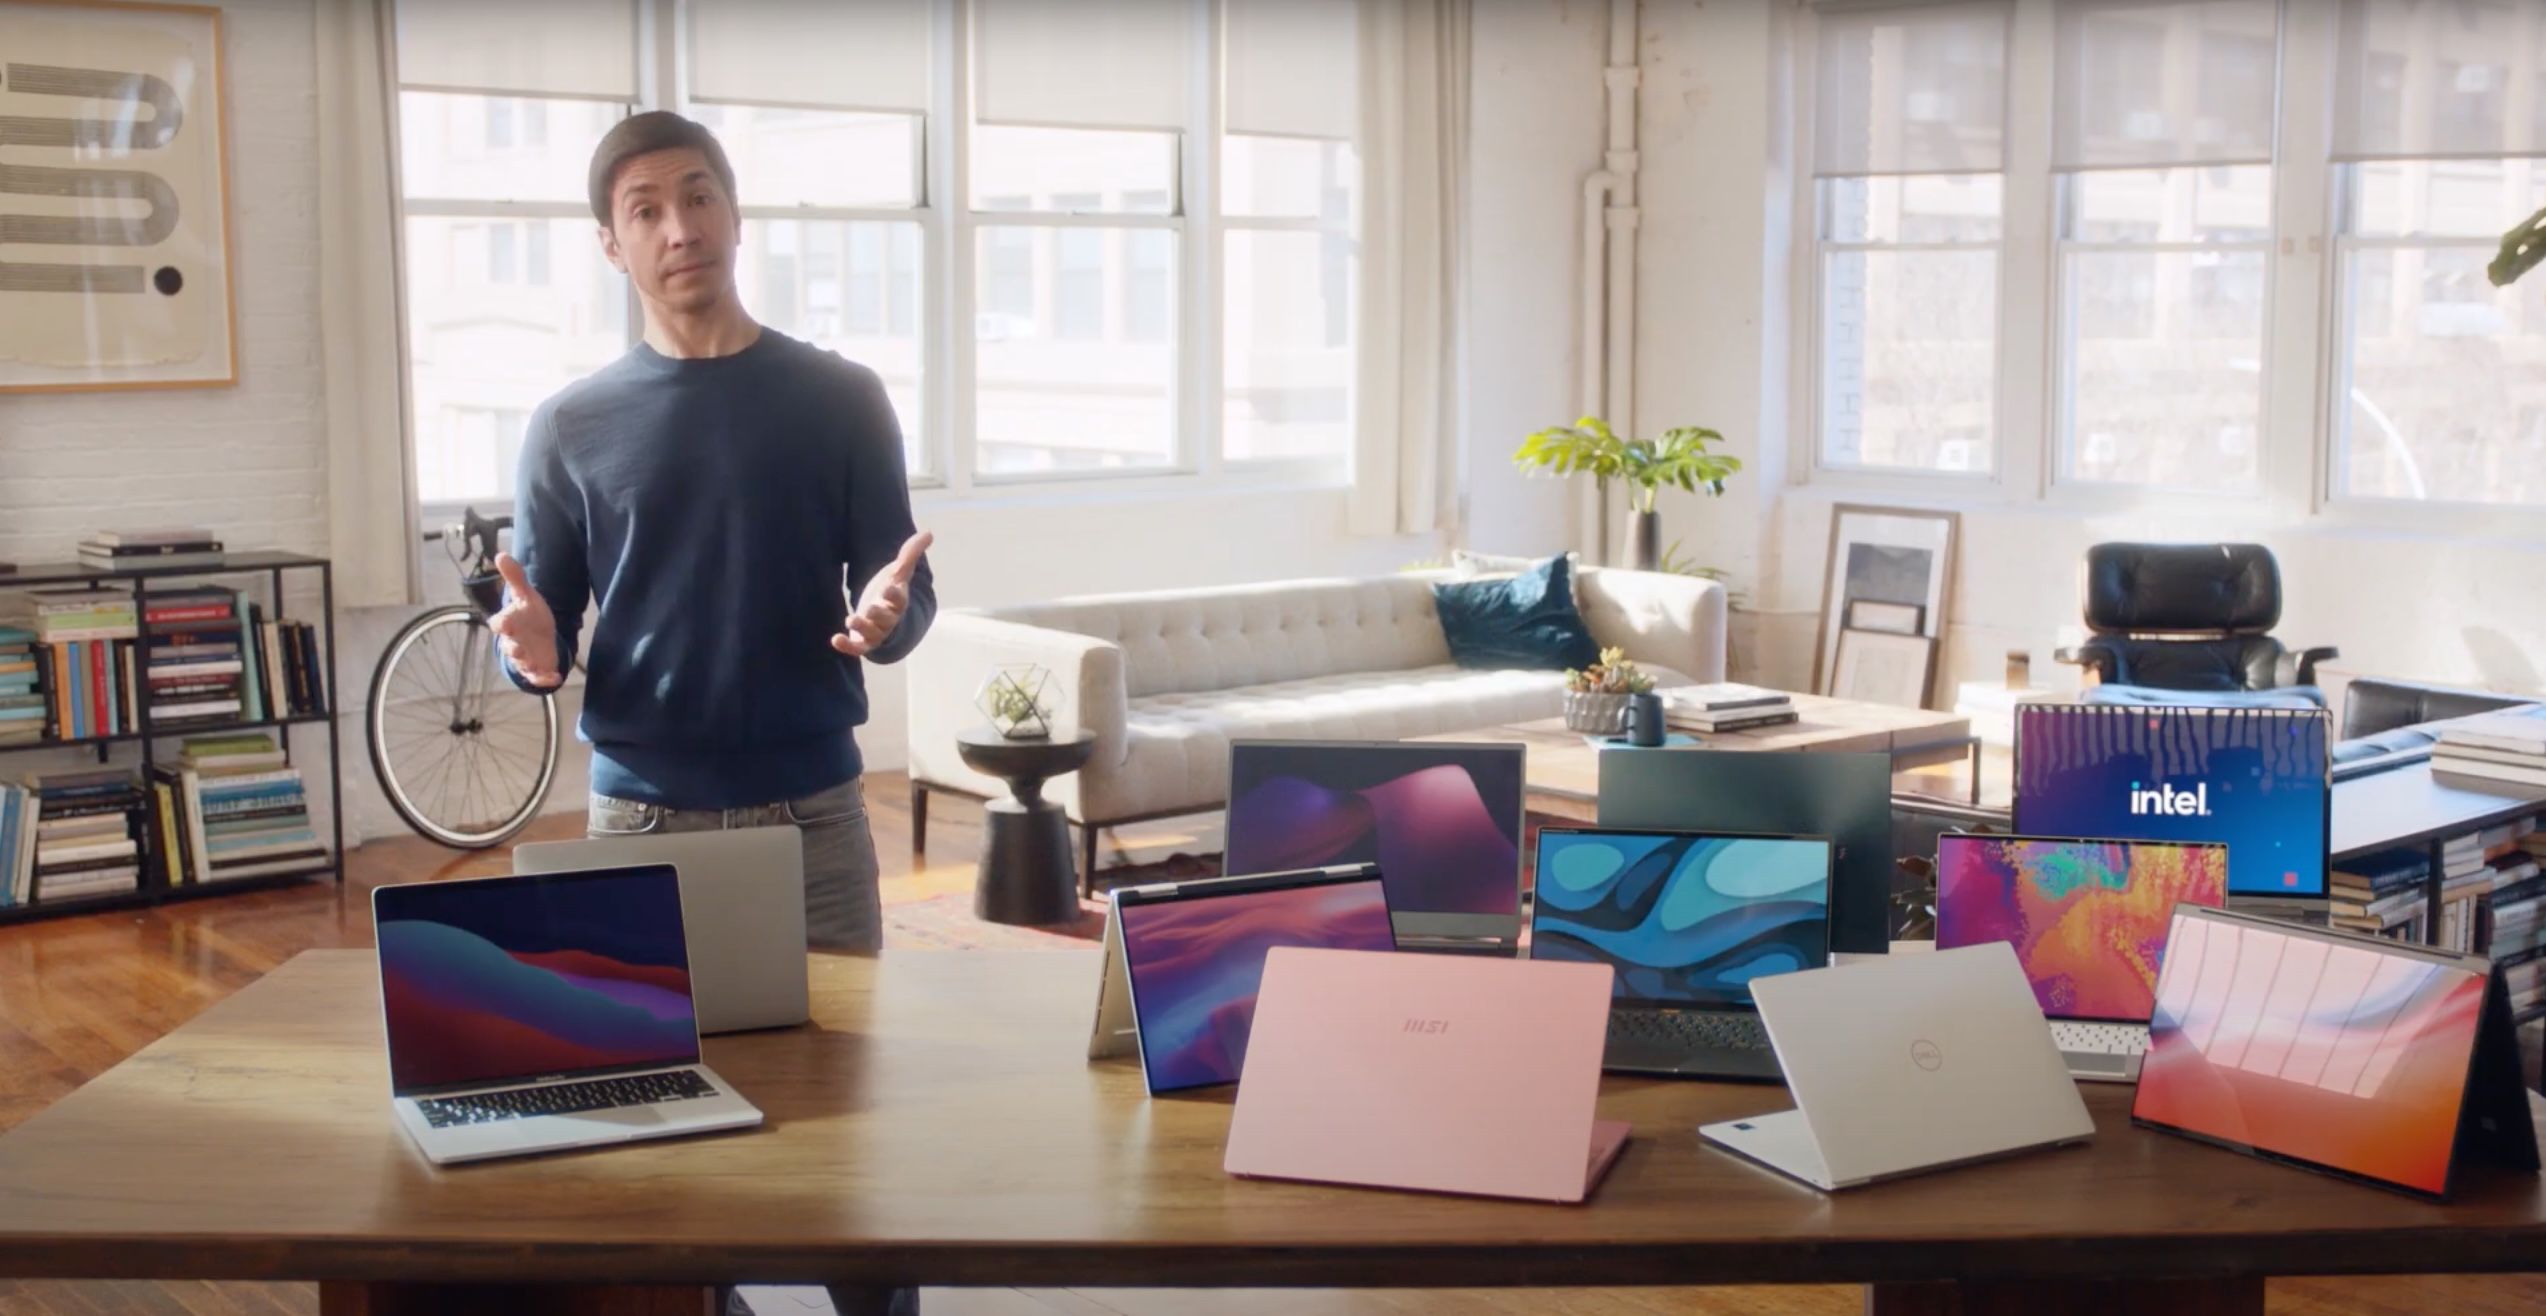 Former ‘I’m a Mac’ actor Justin Long casts shadow on M1 Apple Silicon in new Intel advertising campaign